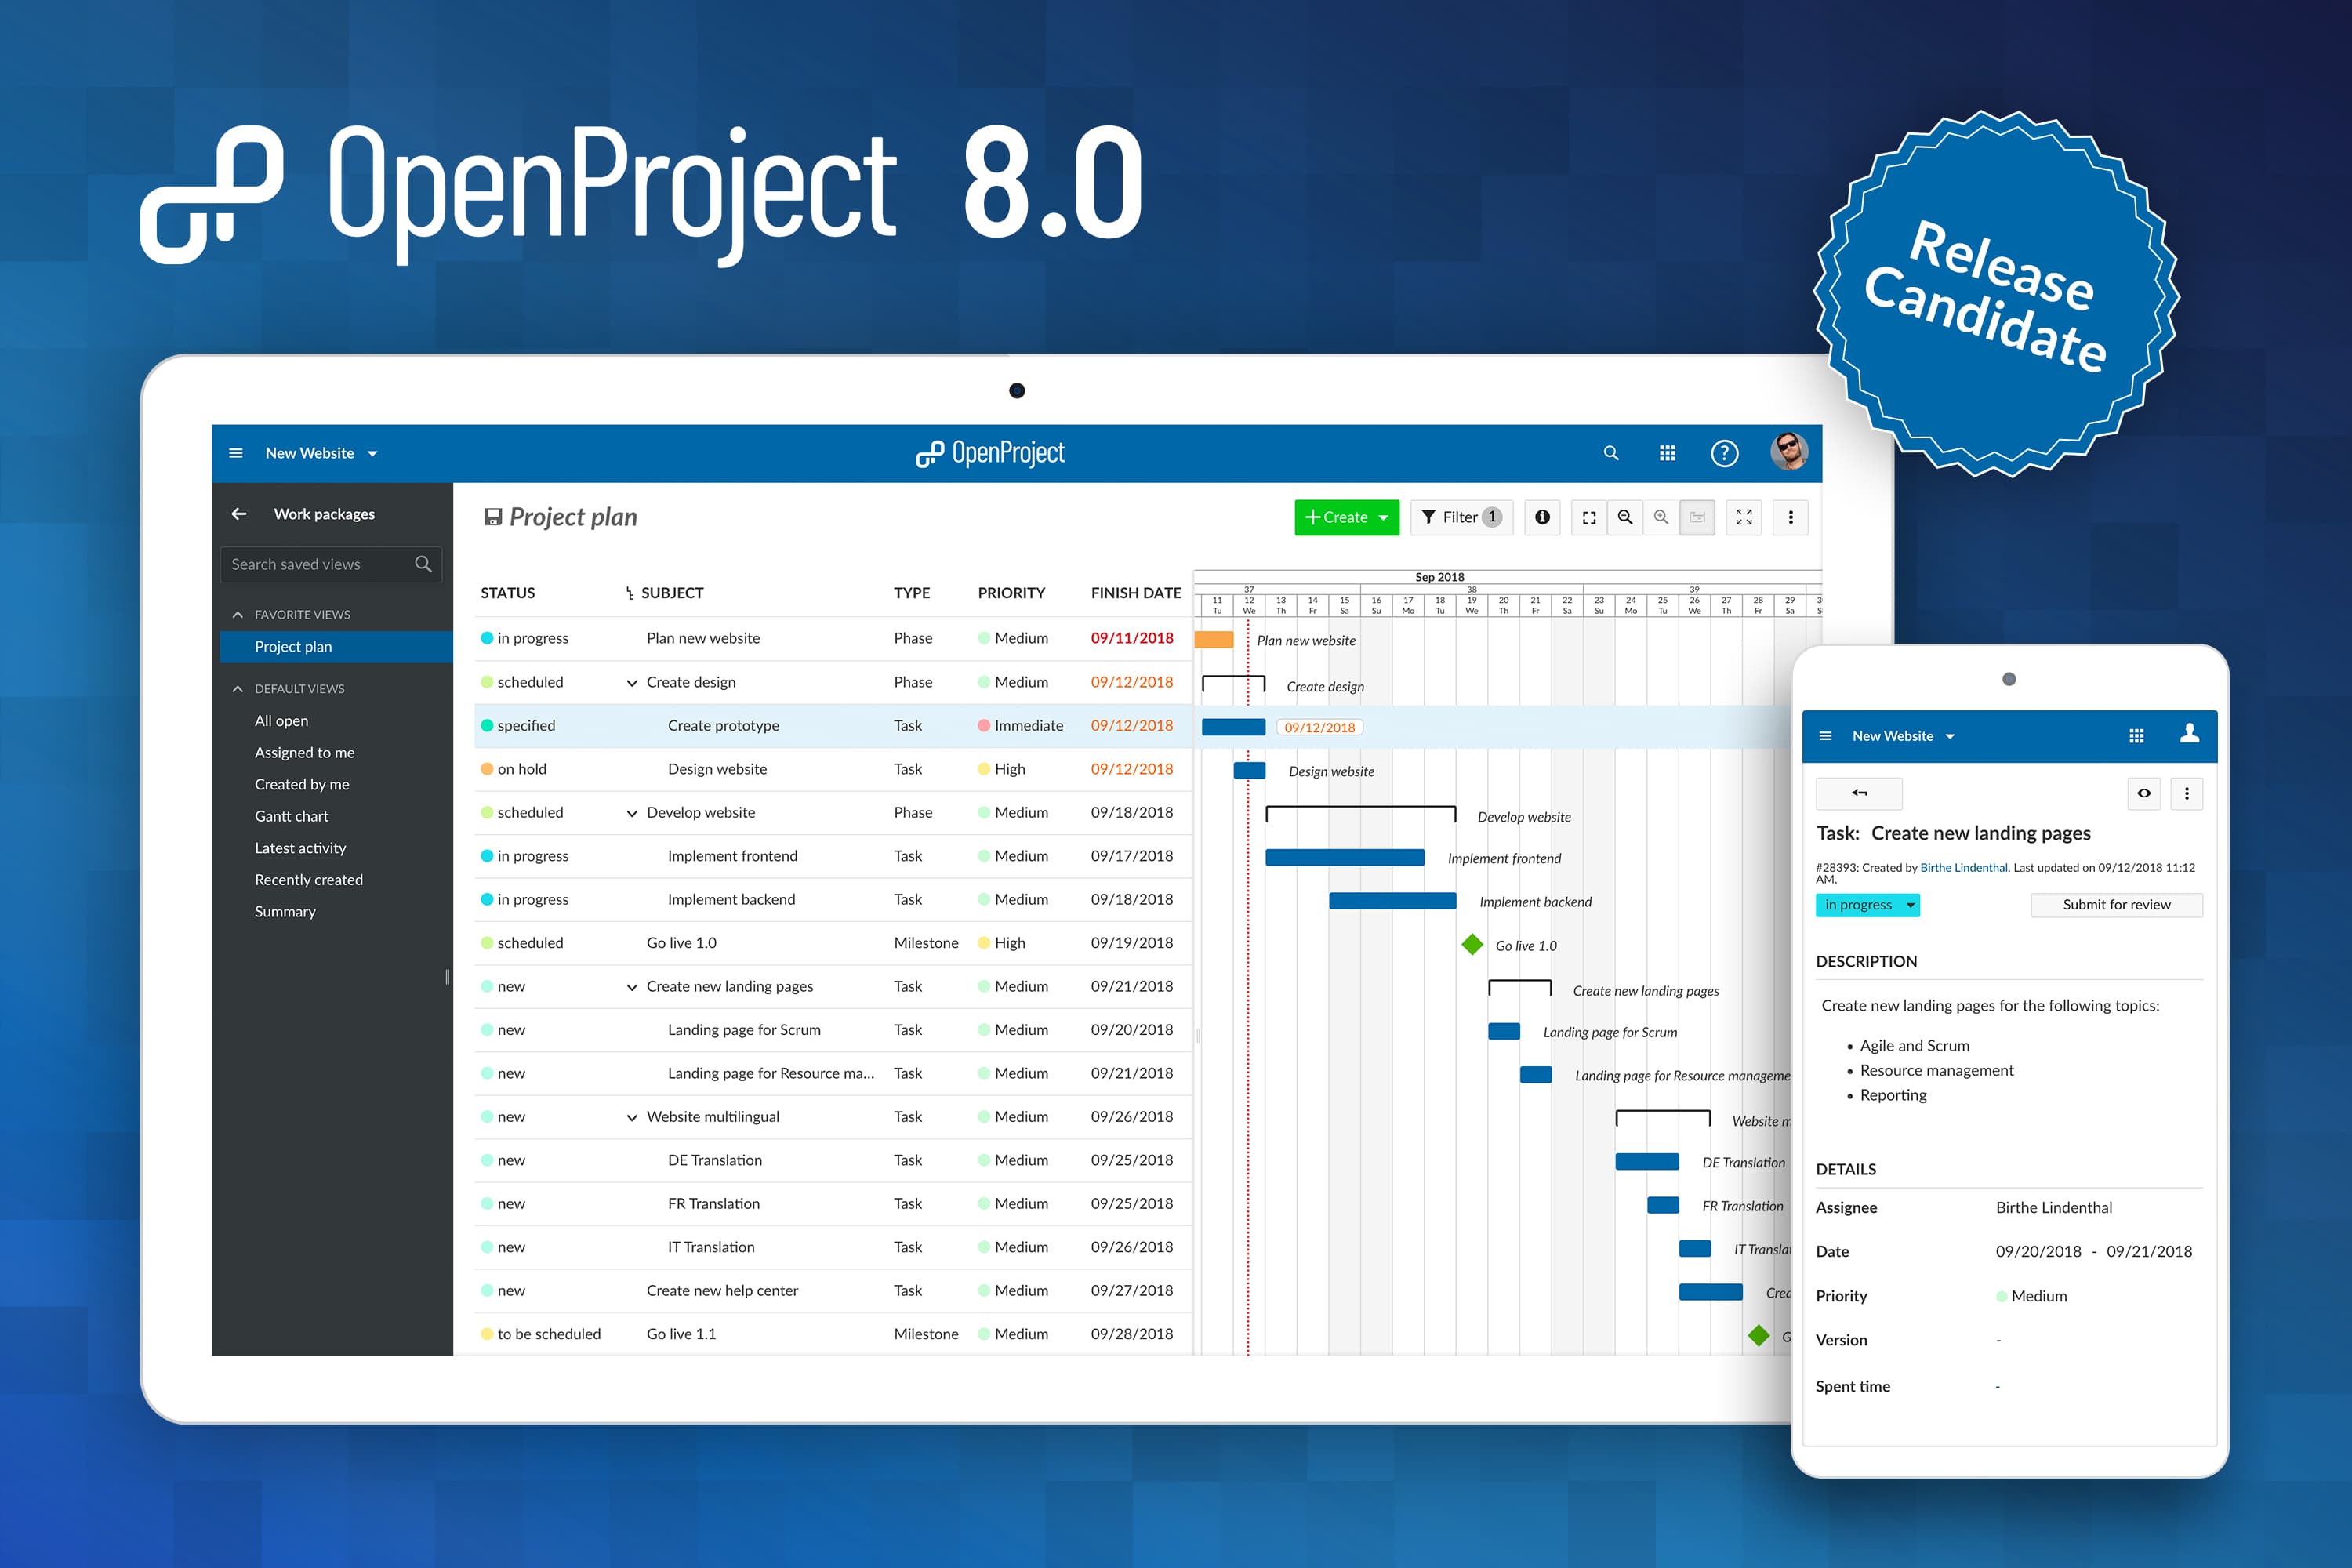 OpenProject 8.0 release candidate offers a sneak preview for new powerful collaboration features